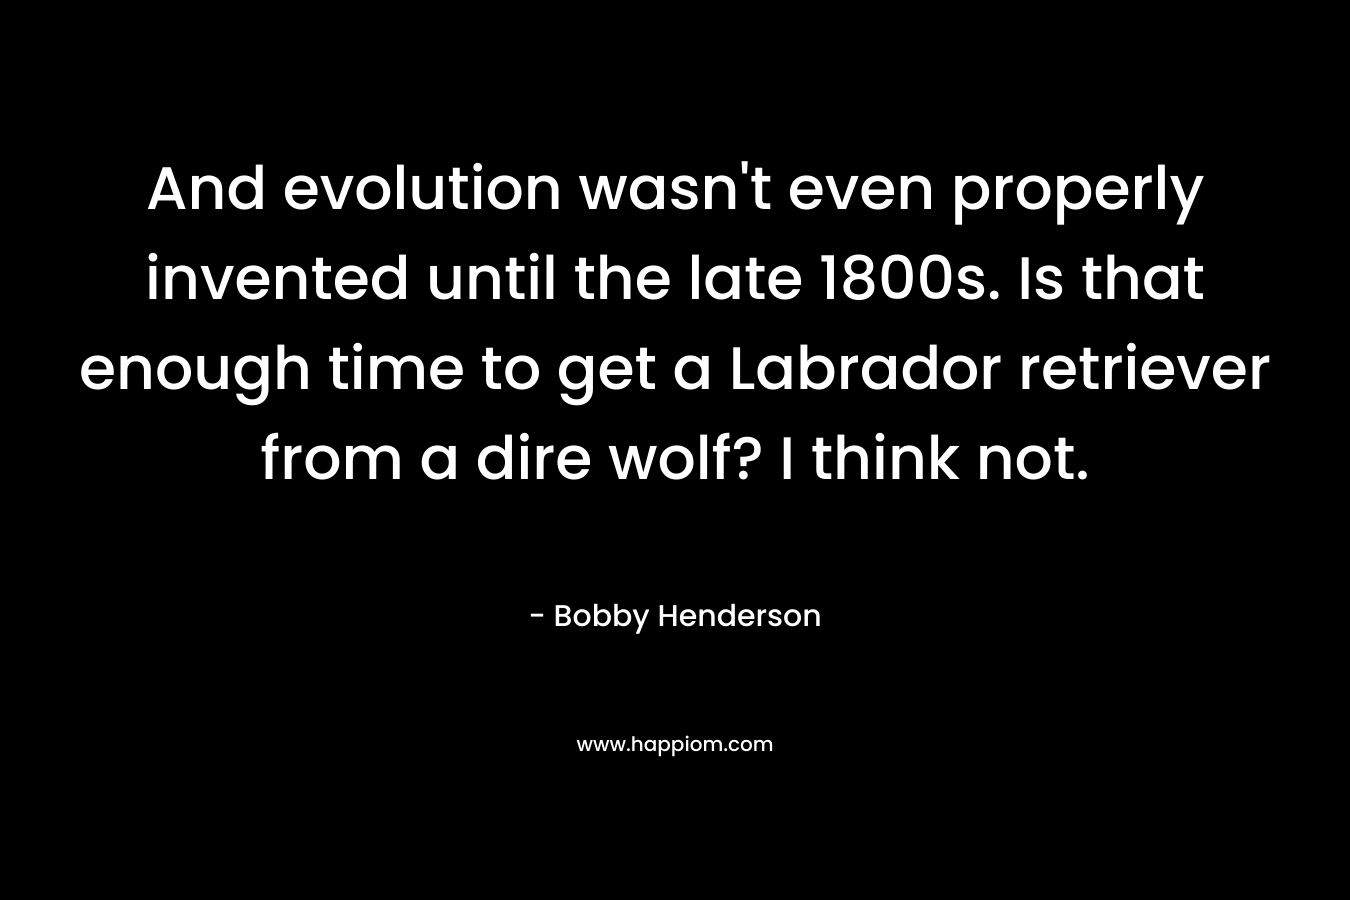 And evolution wasn’t even properly invented until the late 1800s. Is that enough time to get a Labrador retriever from a dire wolf? I think not. – Bobby Henderson